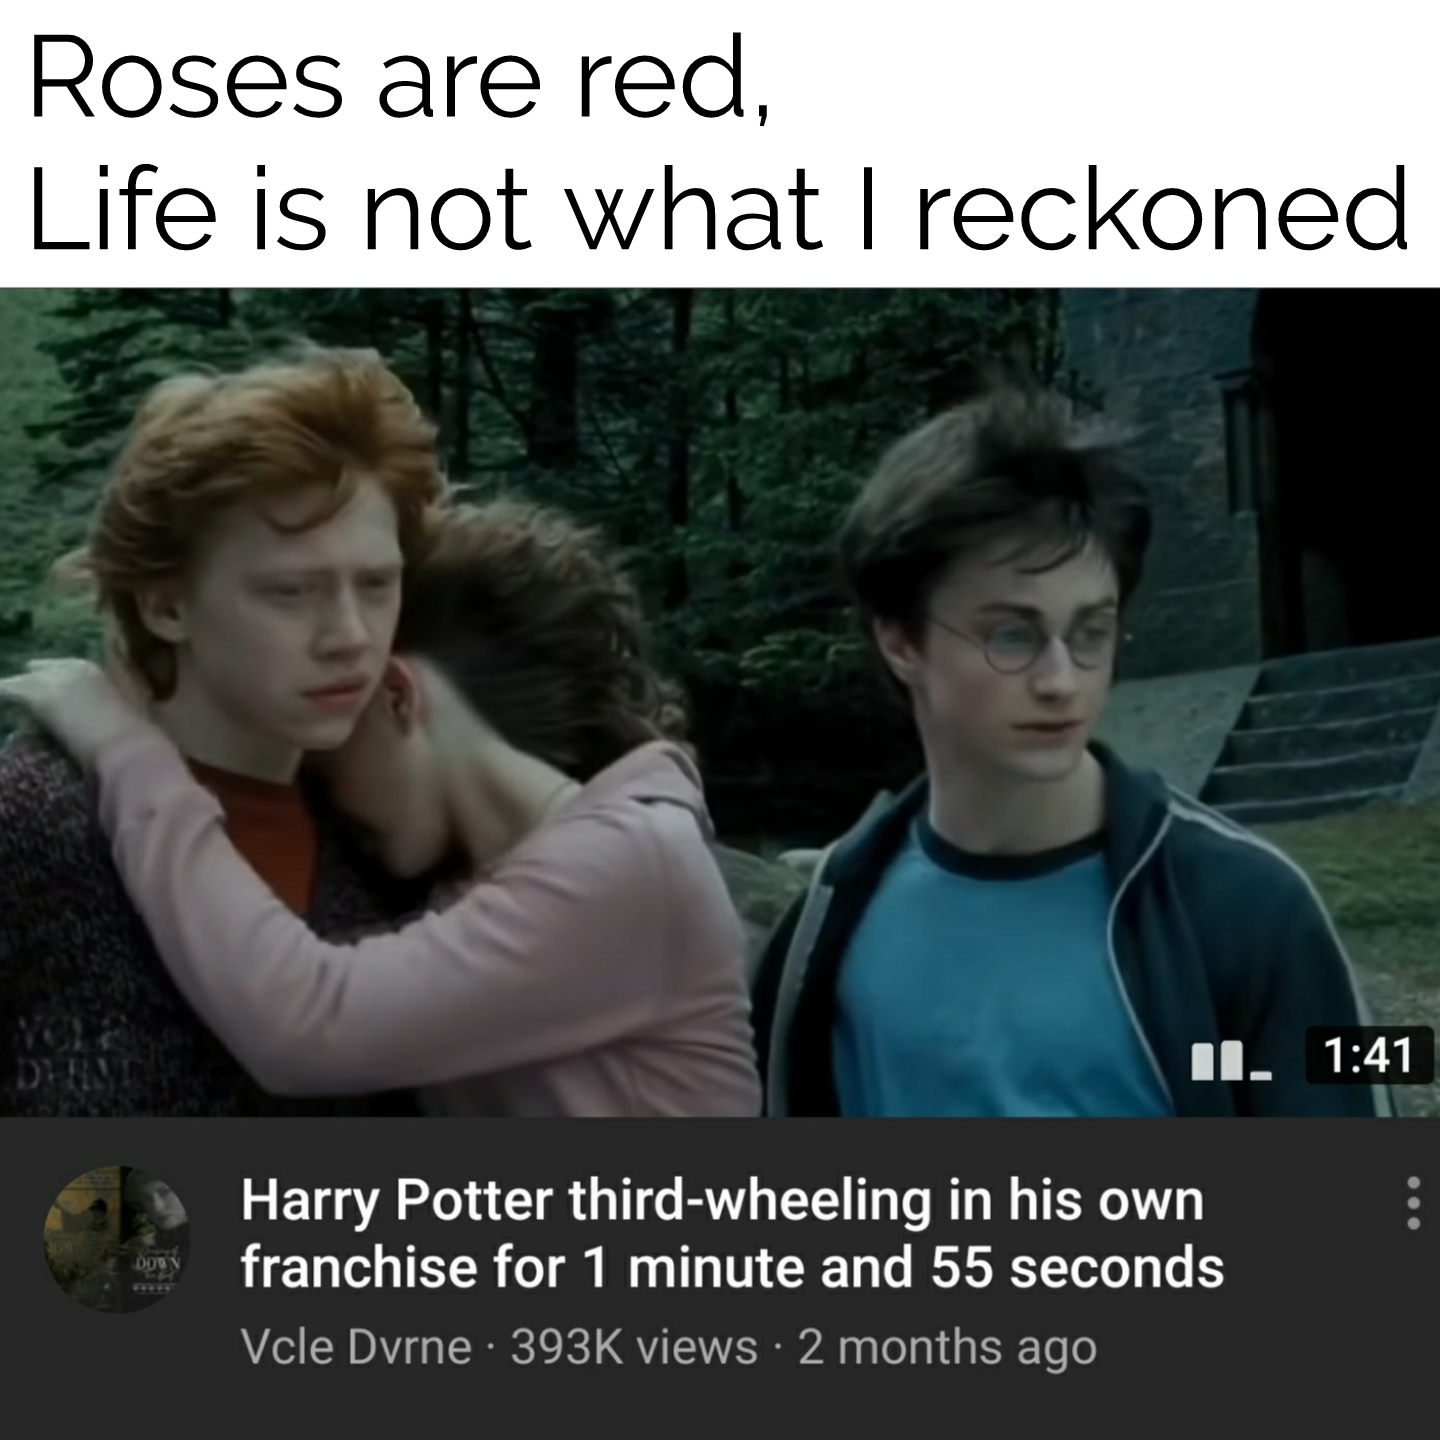 photo caption - Roses are red, Life is not what I reckoned Ys Dini Ii. Harry Potter thirdwheeling in his own franchise for 1 minute and 55 seconds Vcle Dvrne views 2 months ago